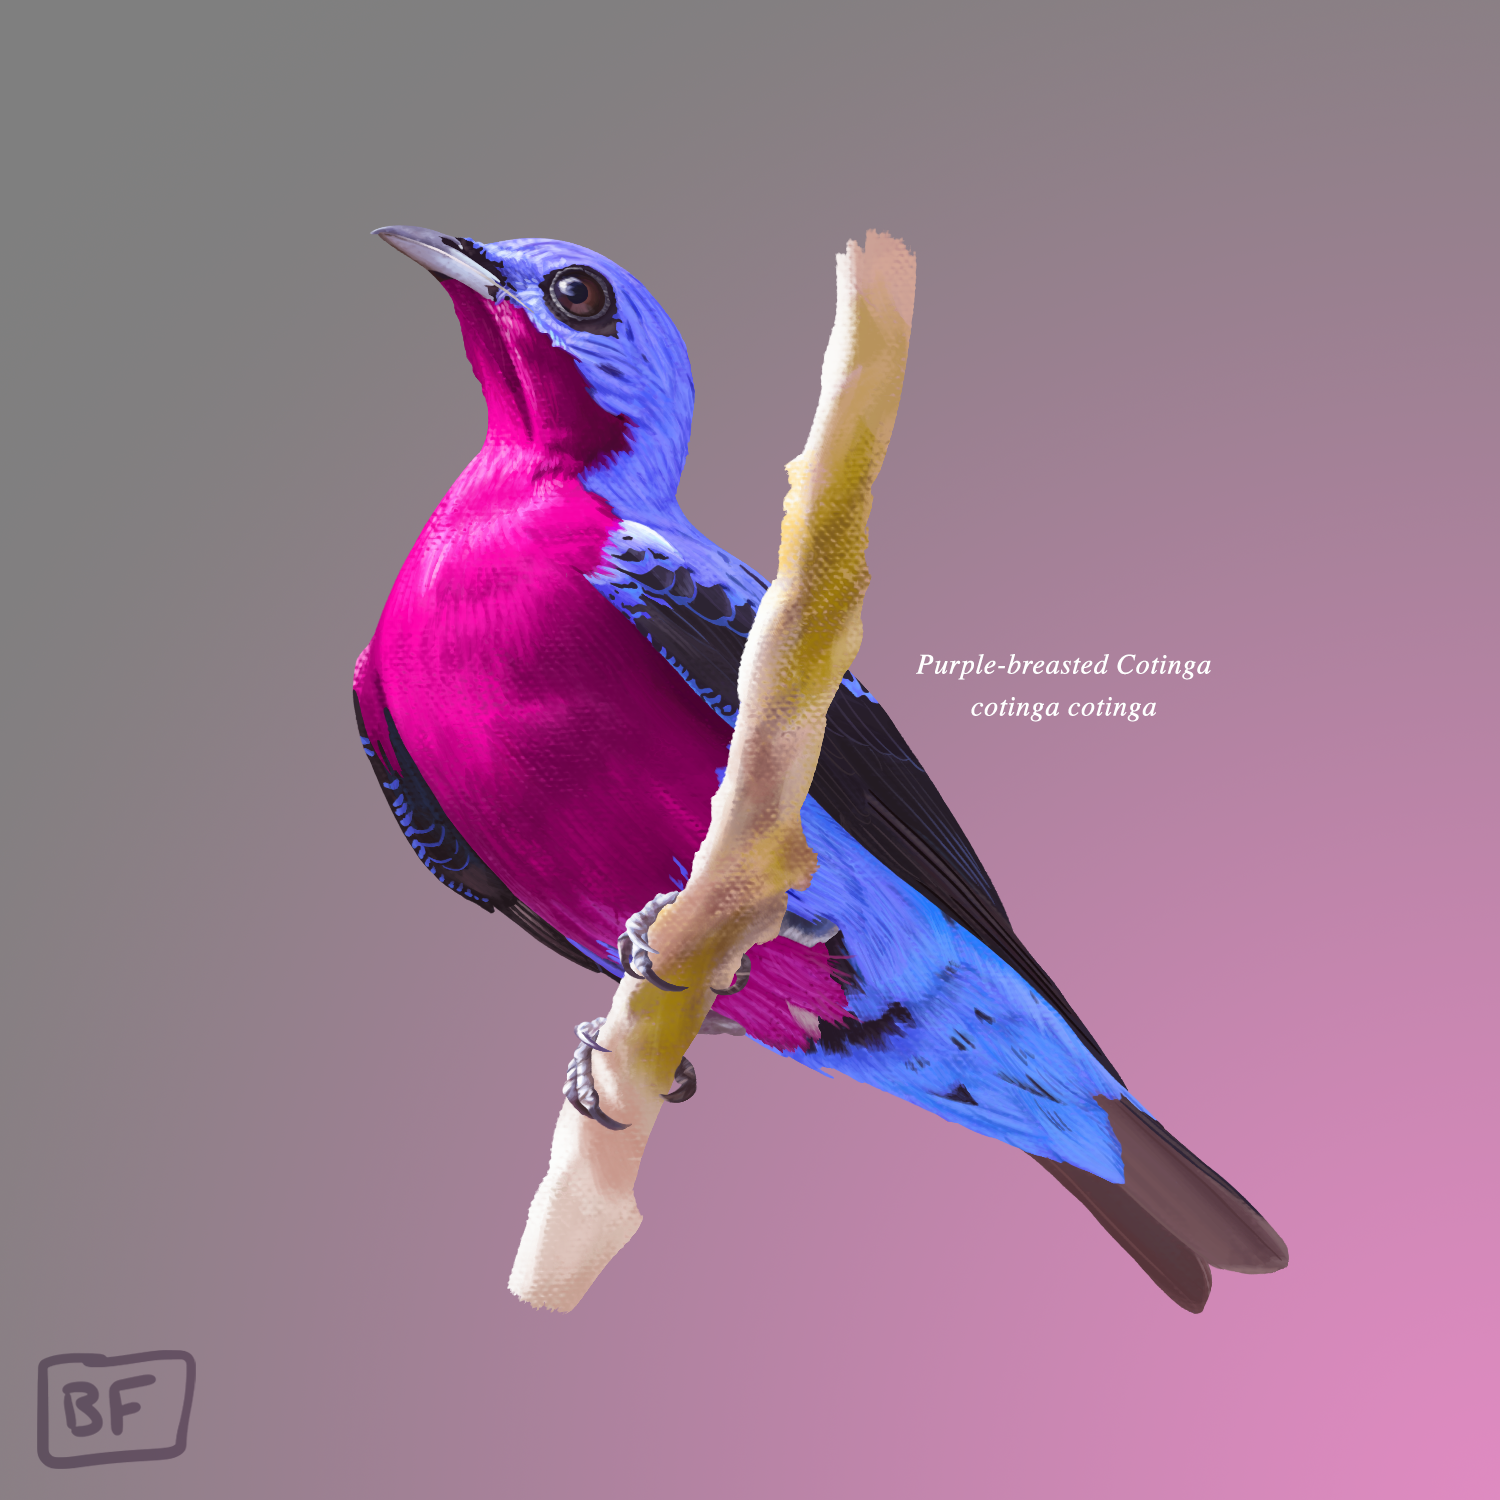 6.Purple Breasted Cotinga.png